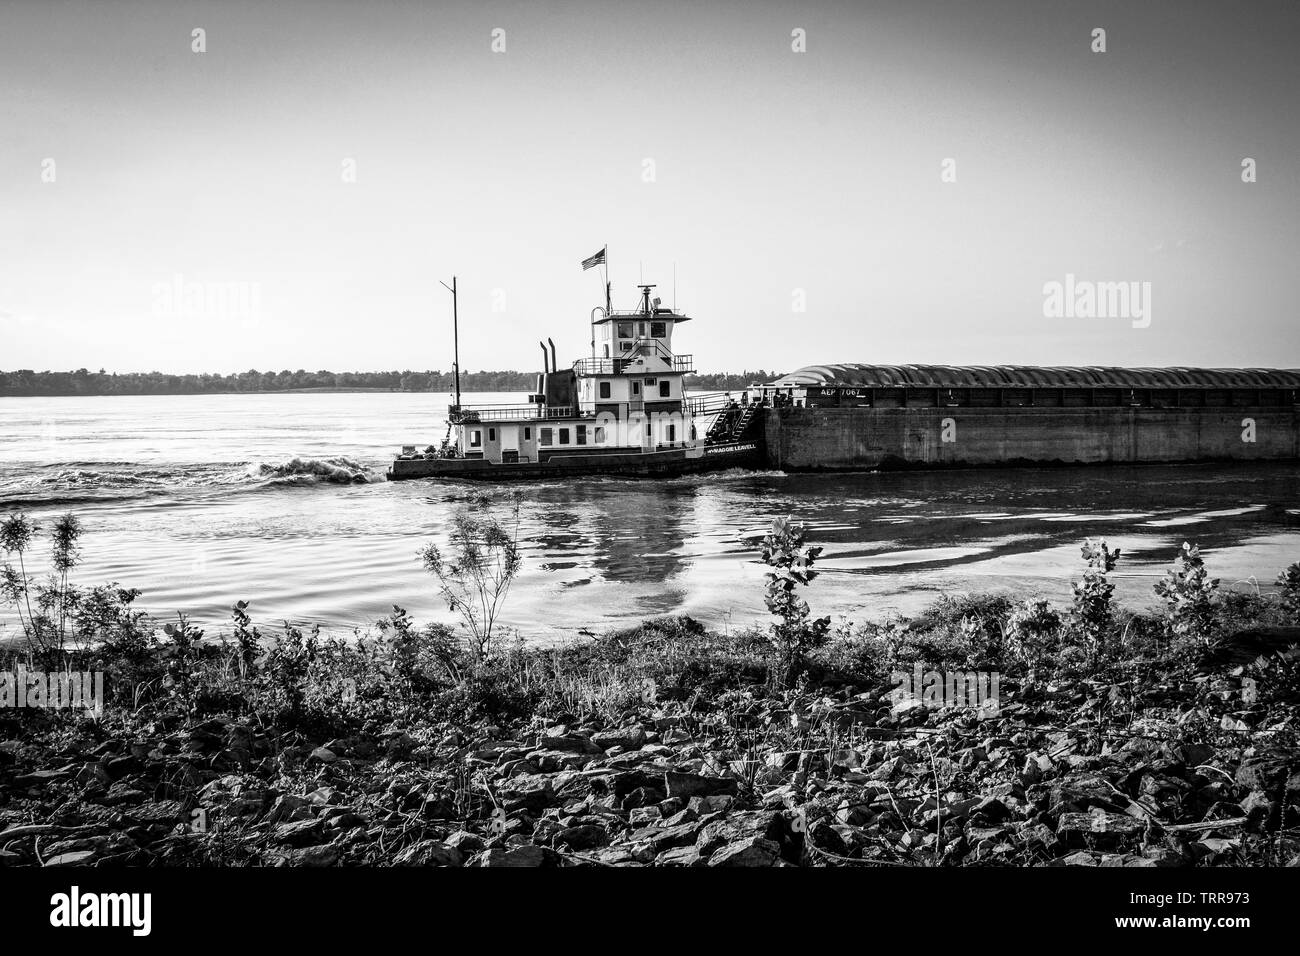 View from the riverbank of a loaded barge navigating the mighty Mississippi River with the help of a tug boat at sundown near Greenville, Mississippi Stock Photo